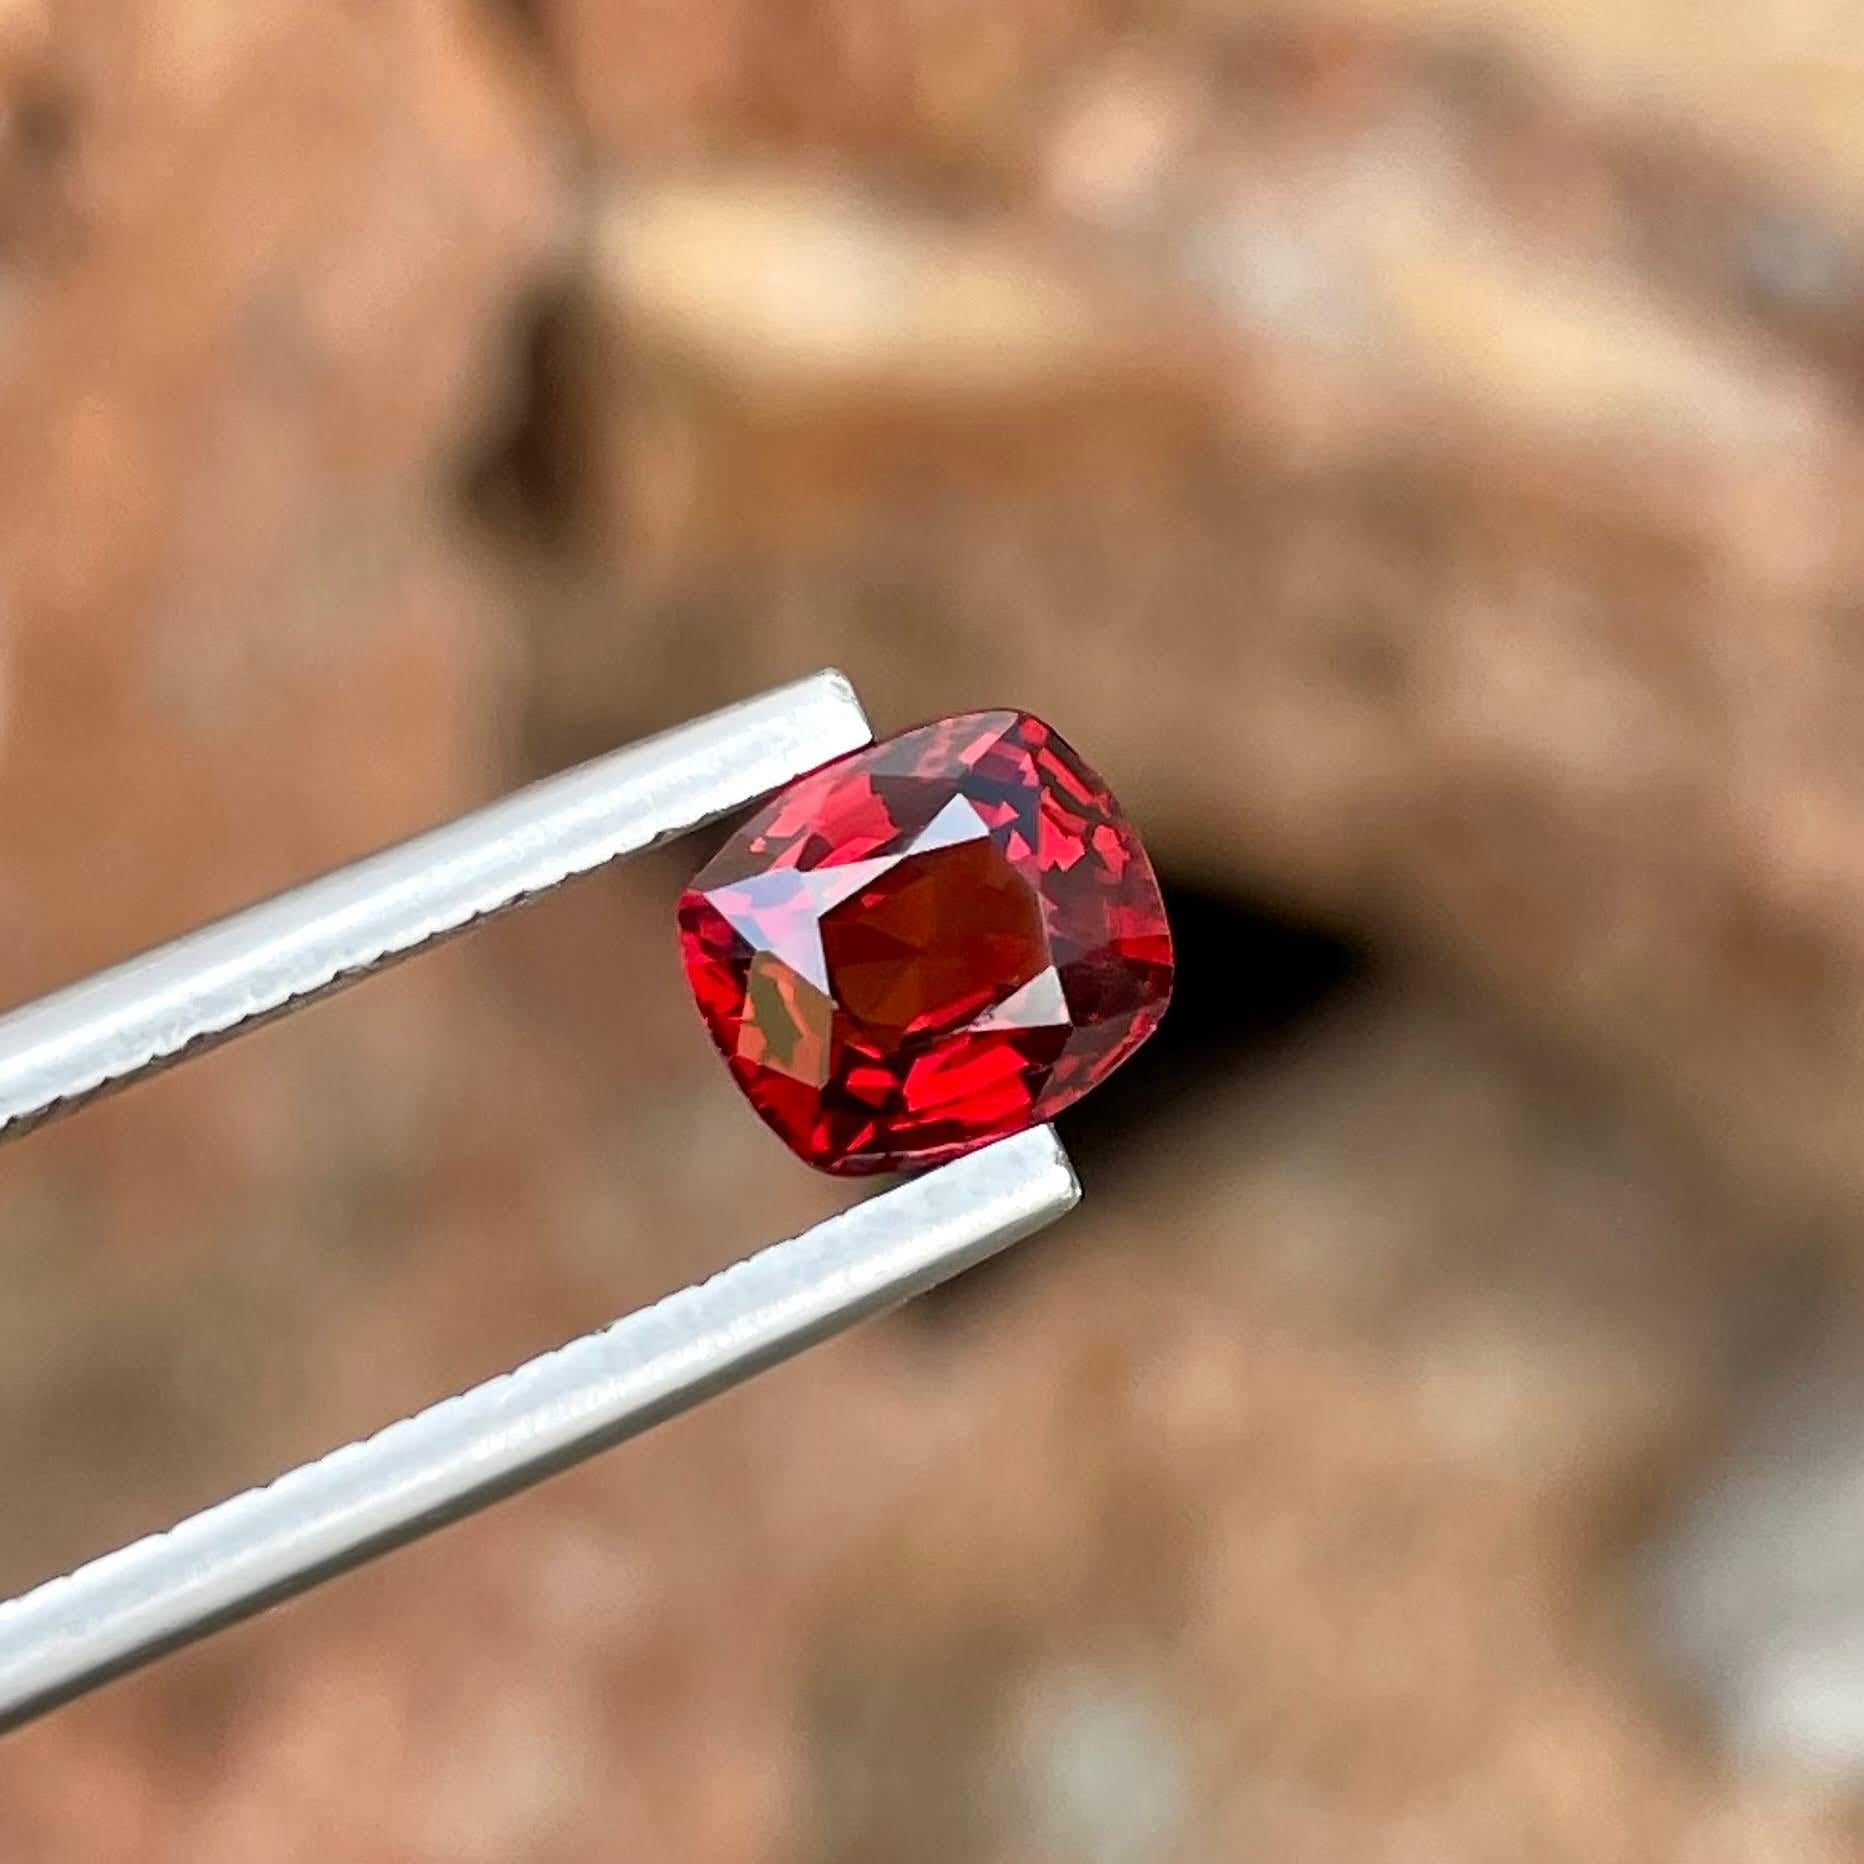 Weight 1.37 carats 
Dimensions 6.94x6.09x3.90 mm
Treatment none 
Origin Burma 
Clarity VVS
Shape cushion 
Cut fancy cushion 




Behold the allure of this exquisite 1.37 carats Red Burmese Spinel, a gemstone of unparalleled beauty and rarity.